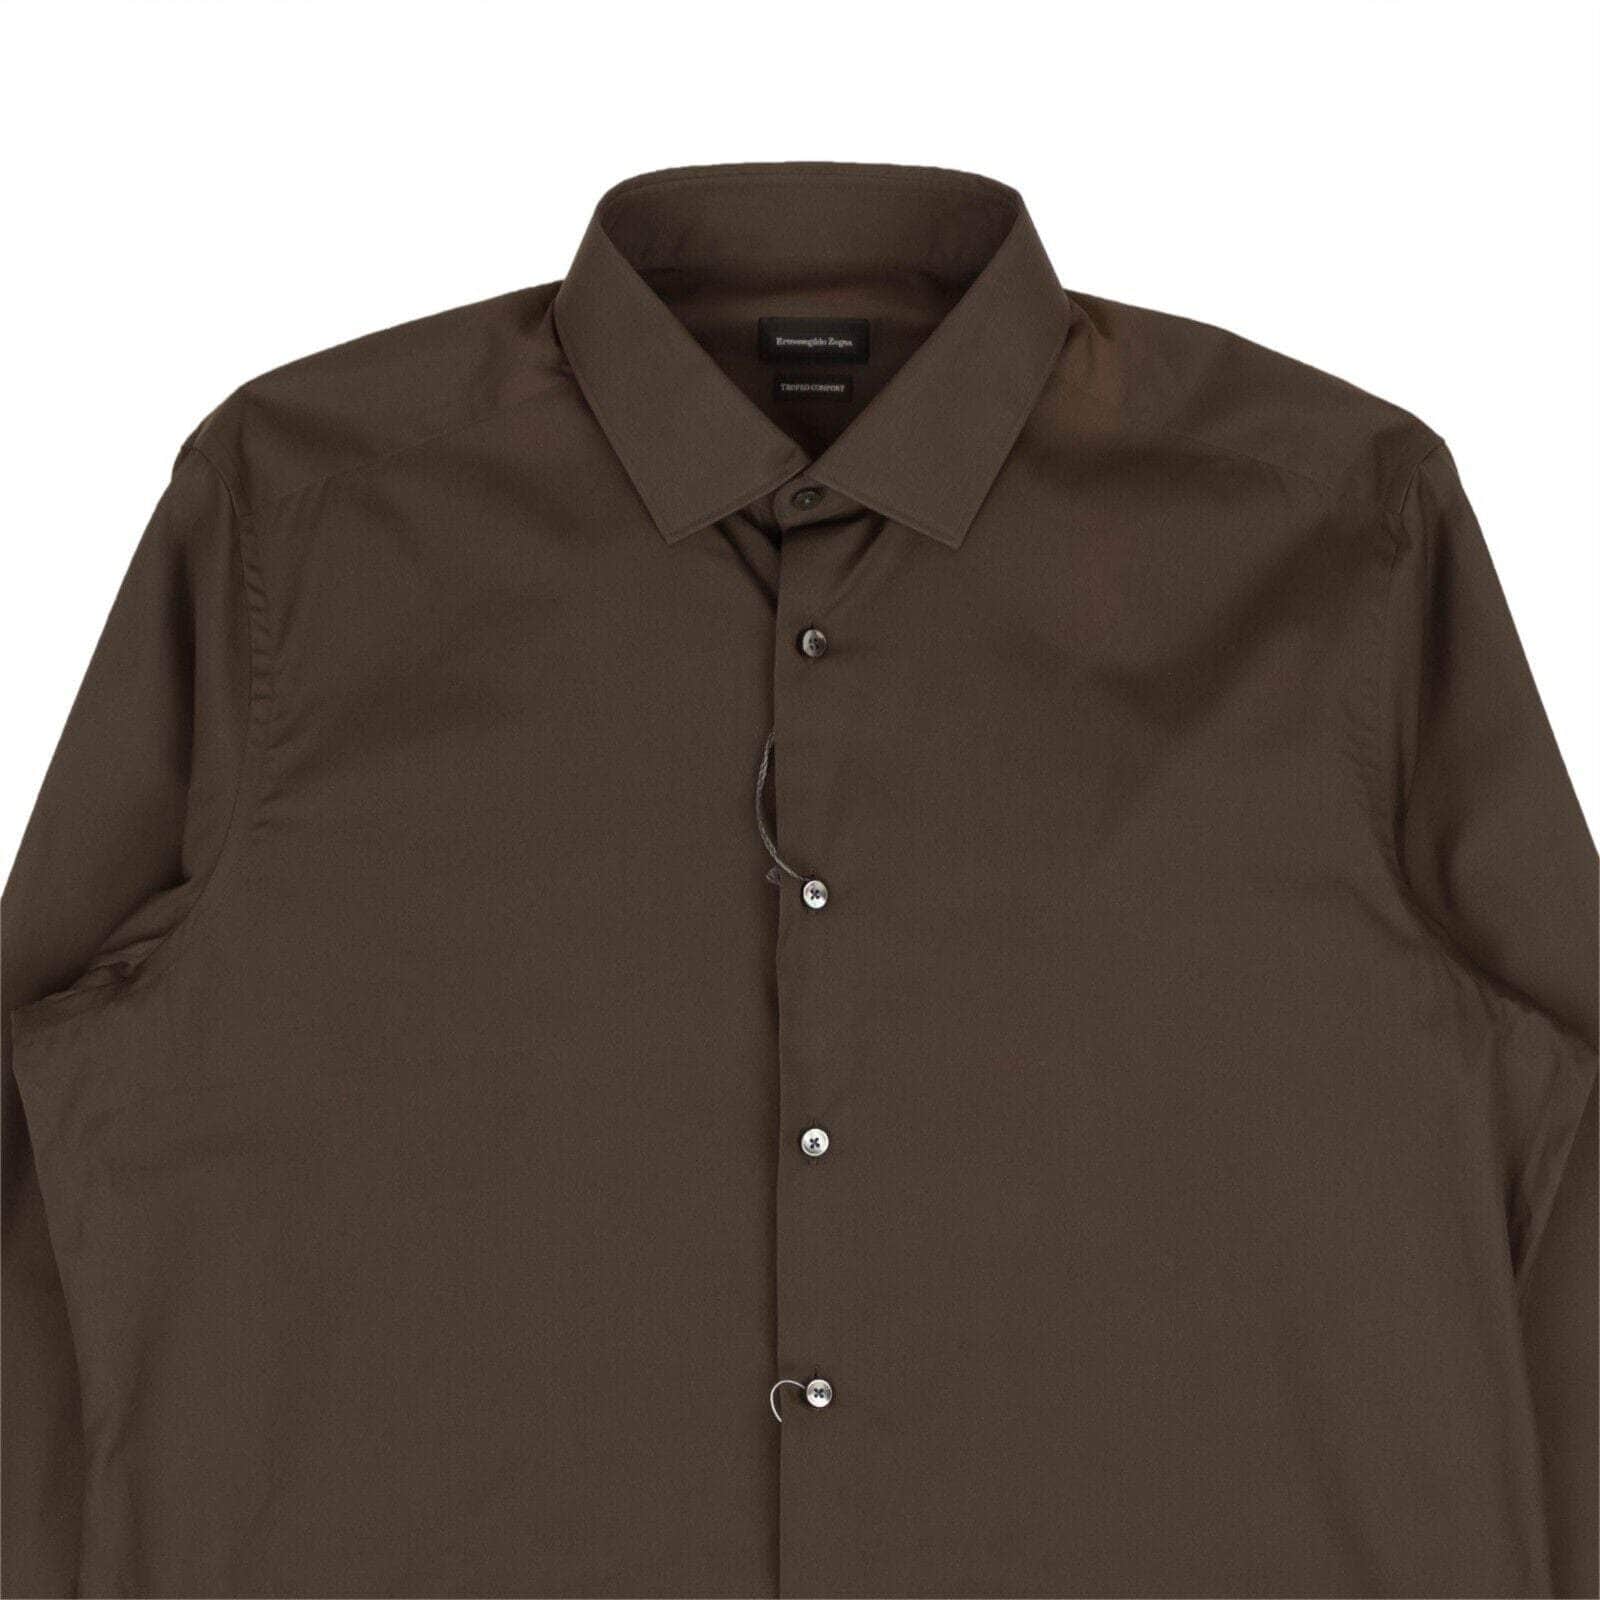 Ermenegildo Zegna 250-500, channelenable-all, chicmi, couponcollection, gender-mens, main-clothing, mens-shoes, size-44 44 Brown Cotton Button Down Dress Shirt 95-ZGN-1019/44 95-ZGN-1019/44